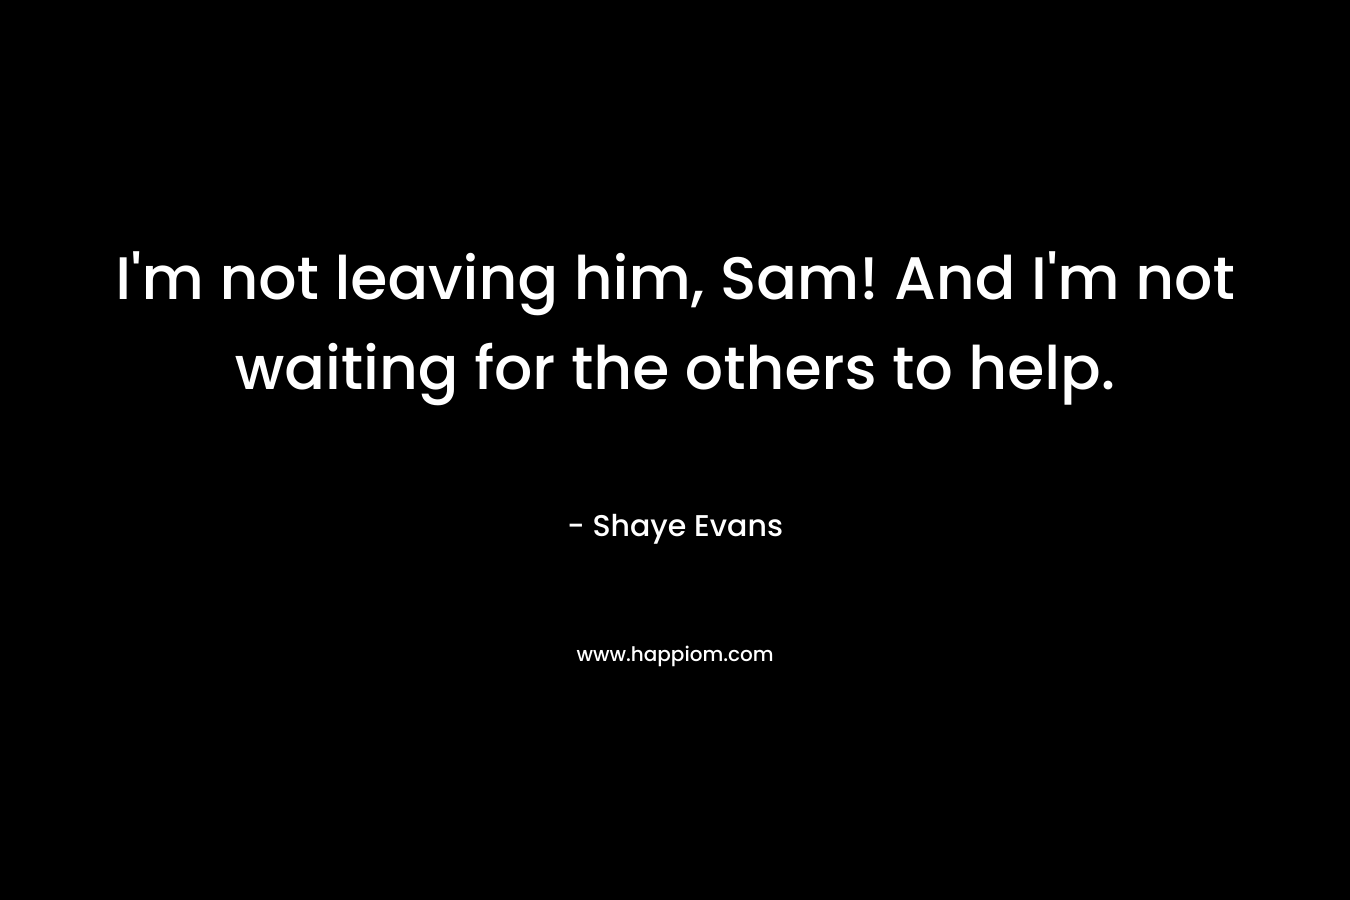 I'm not leaving him, Sam! And I'm not waiting for the others to help.